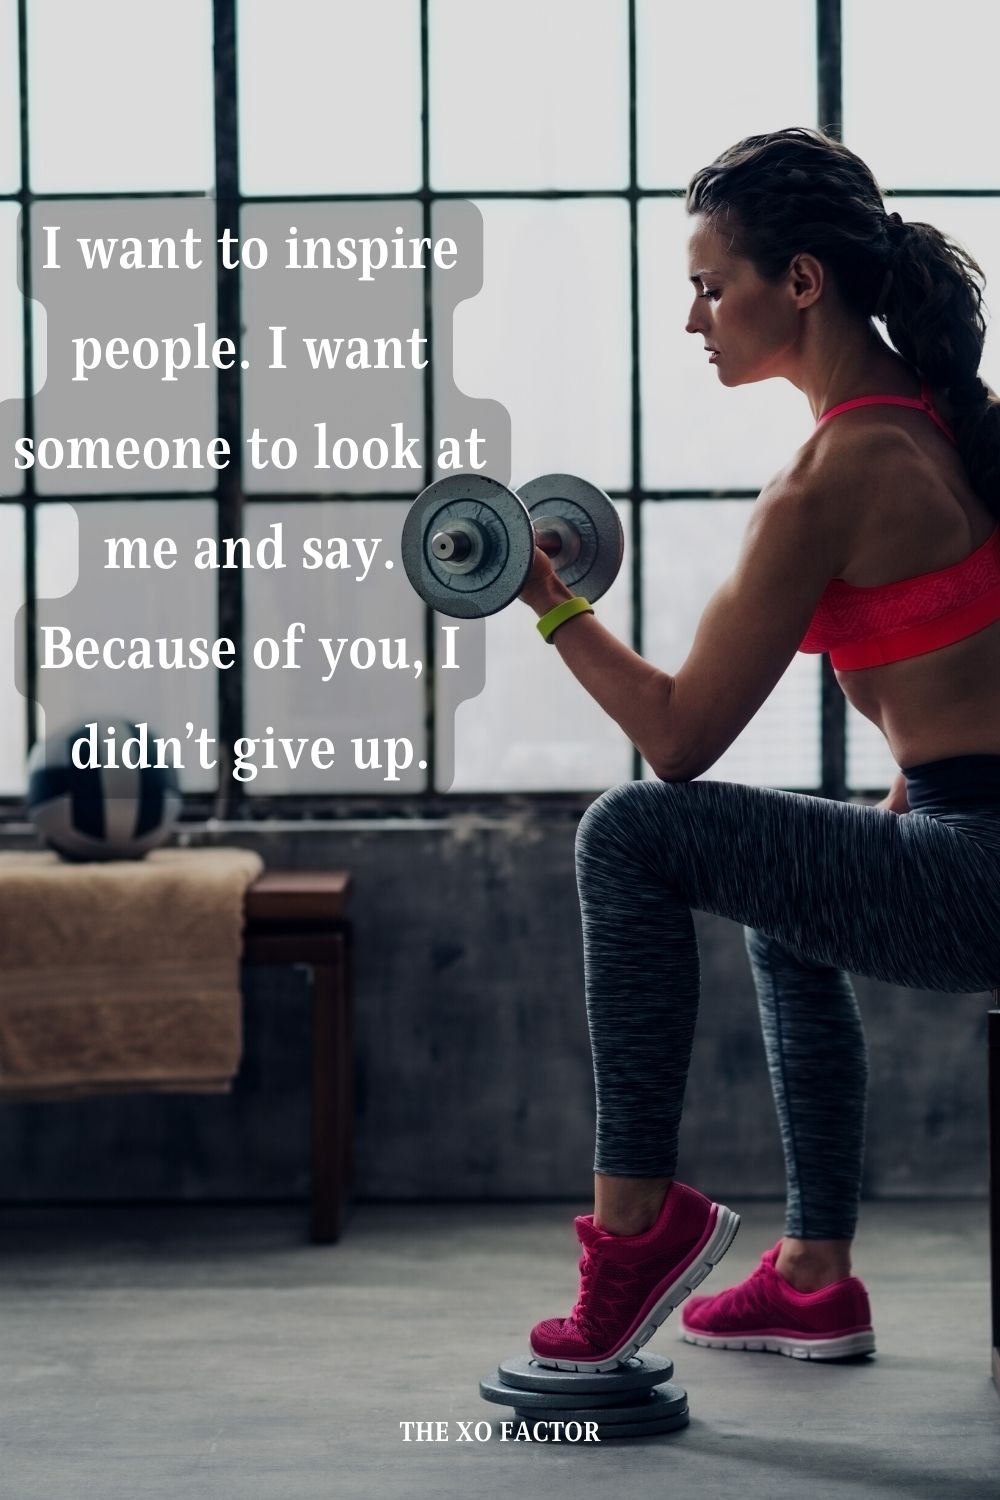 I want to inspire people. I want someone to look at me and say. Because of you, I didn’t give up.